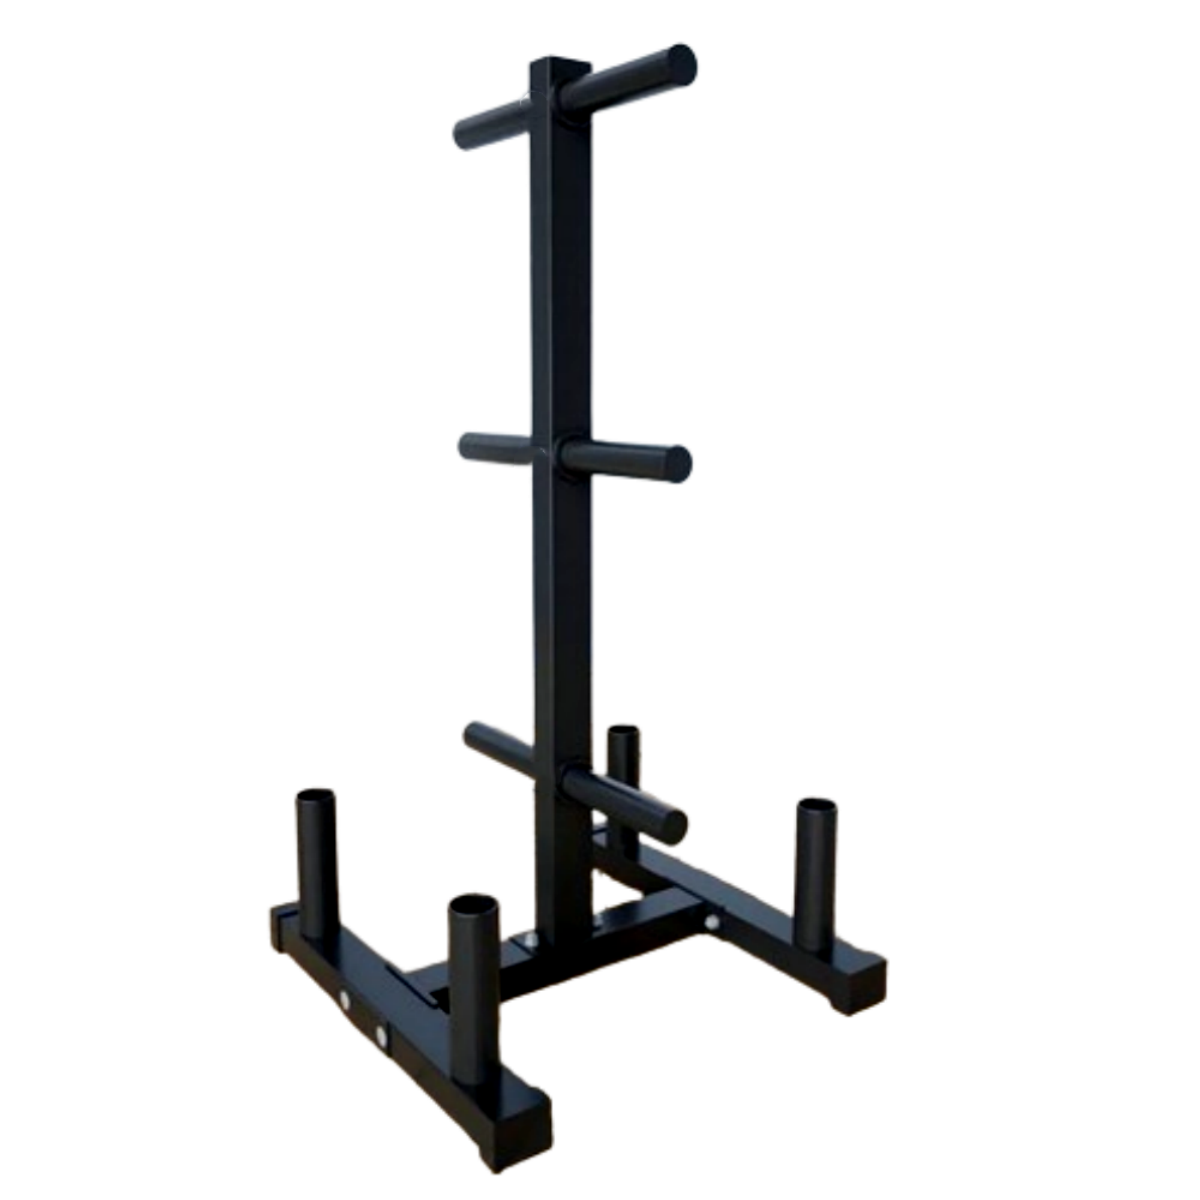 Bumper Weights Rack with 4 barbell holders